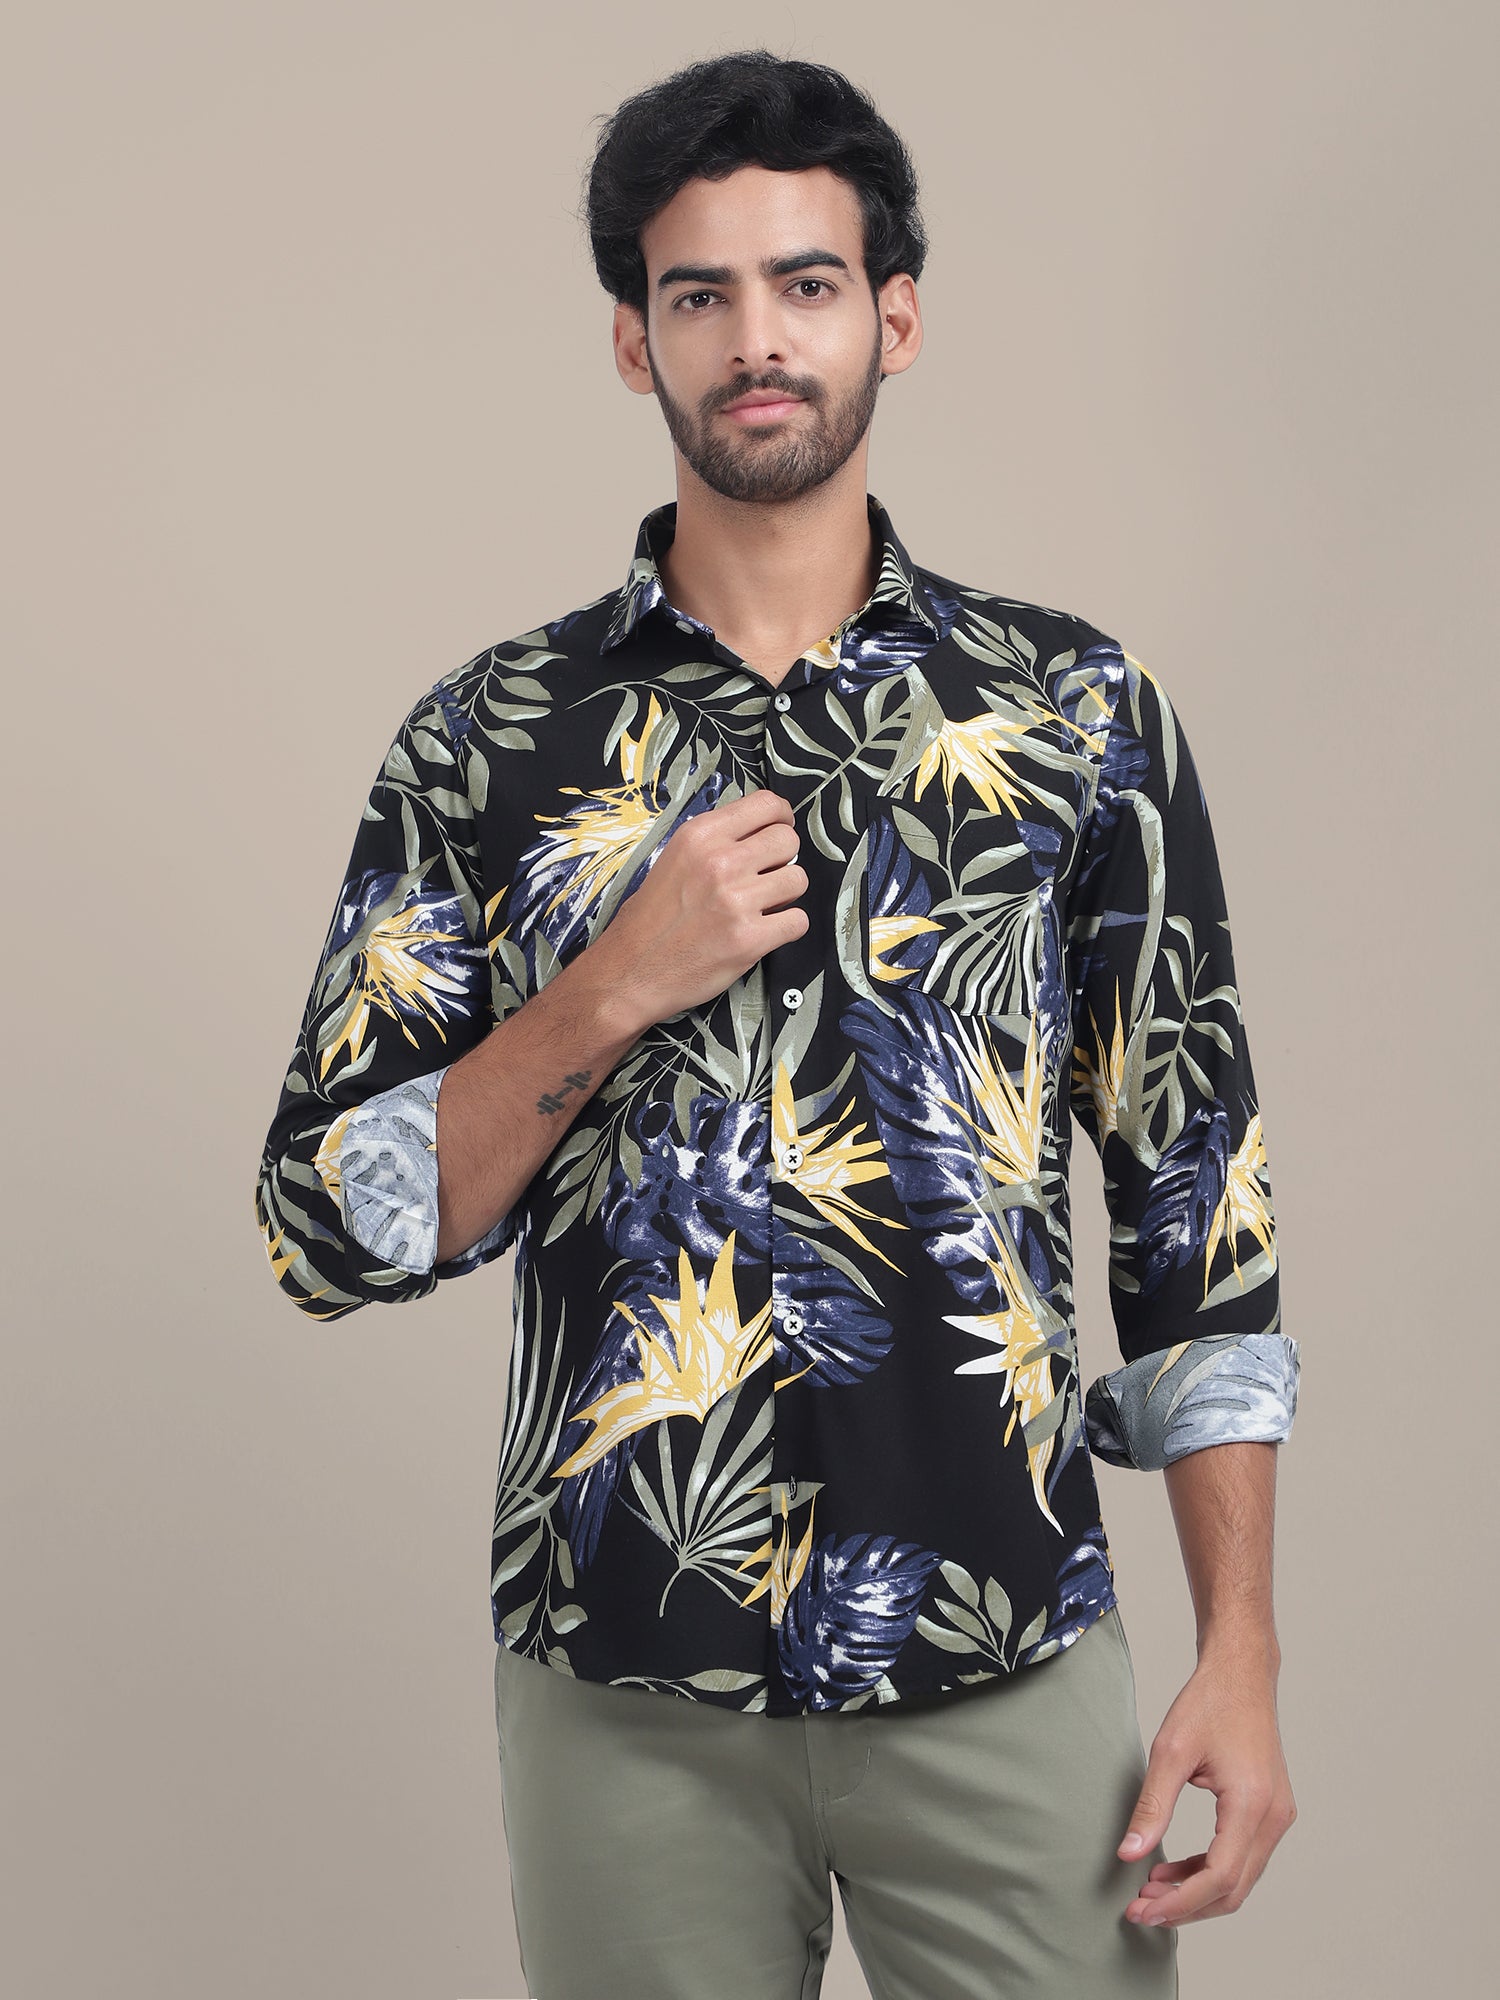 Men's Premium Rayon Shirt With Jungle Print In Full Sleeve And Black Color